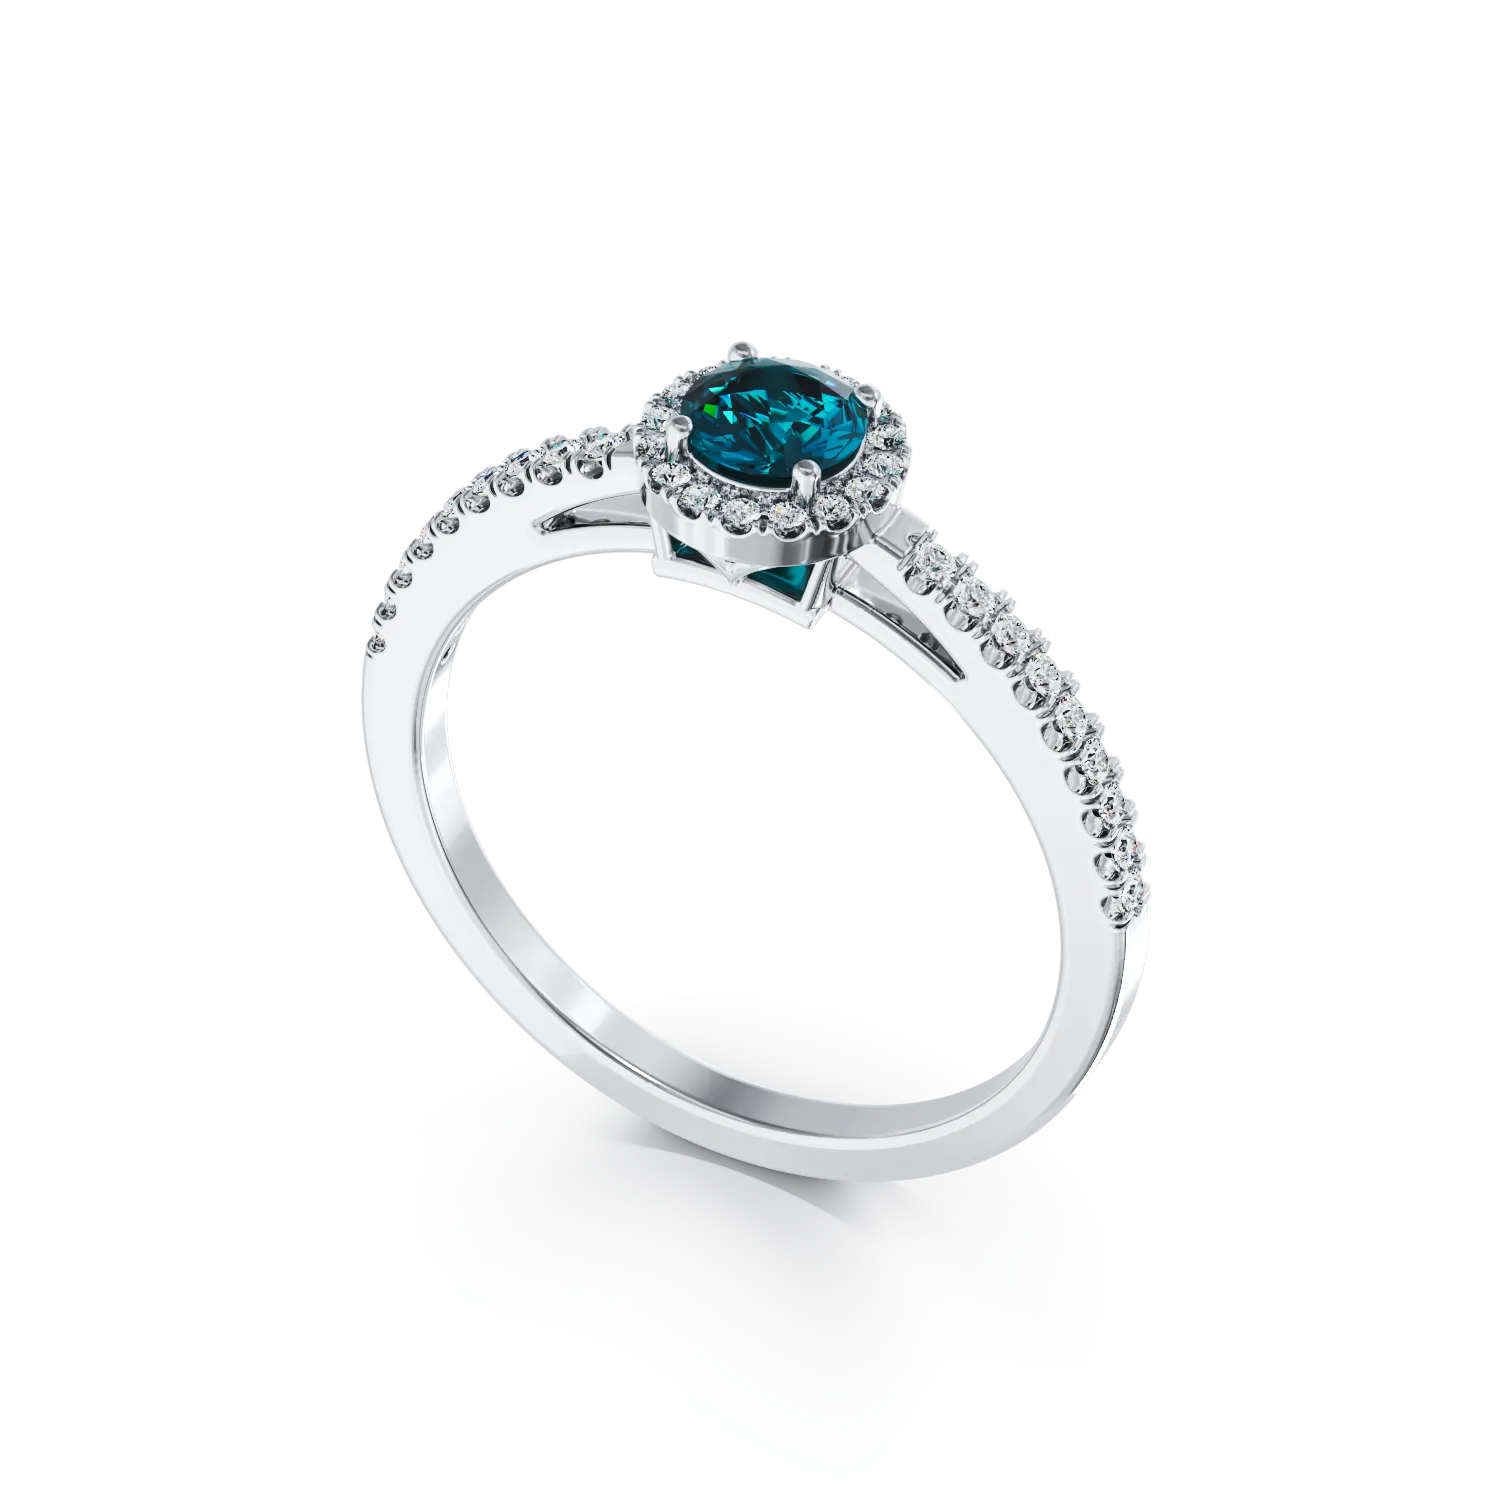 18K white gold engagement ring with 0.22ct blue diamond and 0.18ct clear diamonds